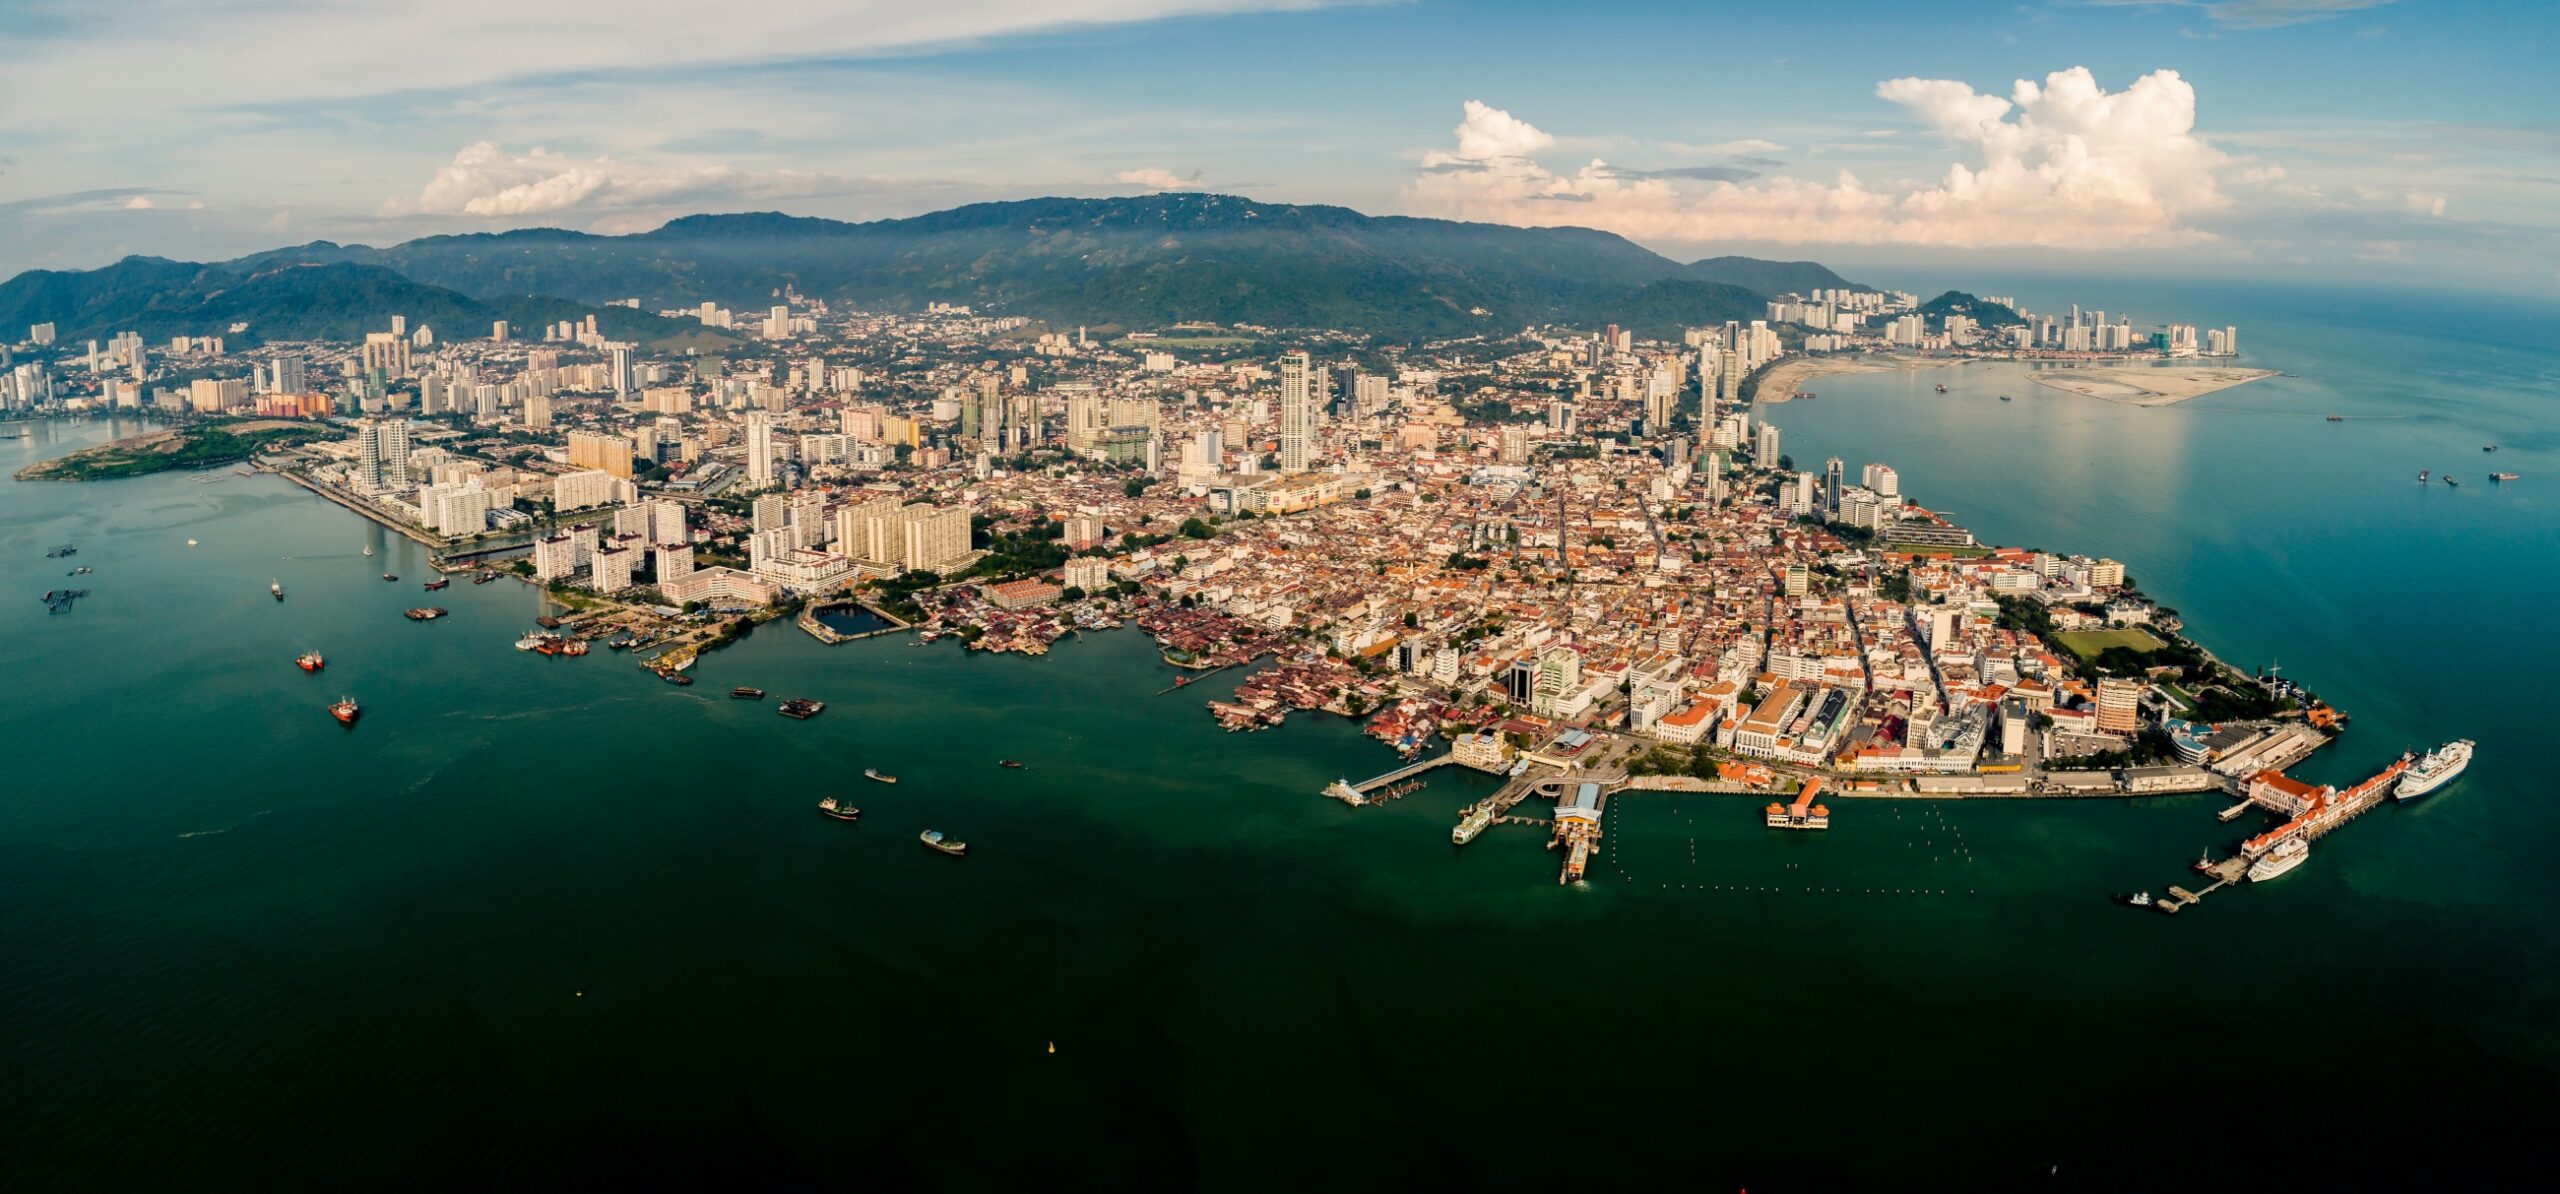 Penang: From George Town to the Jungle: The Places to Visit